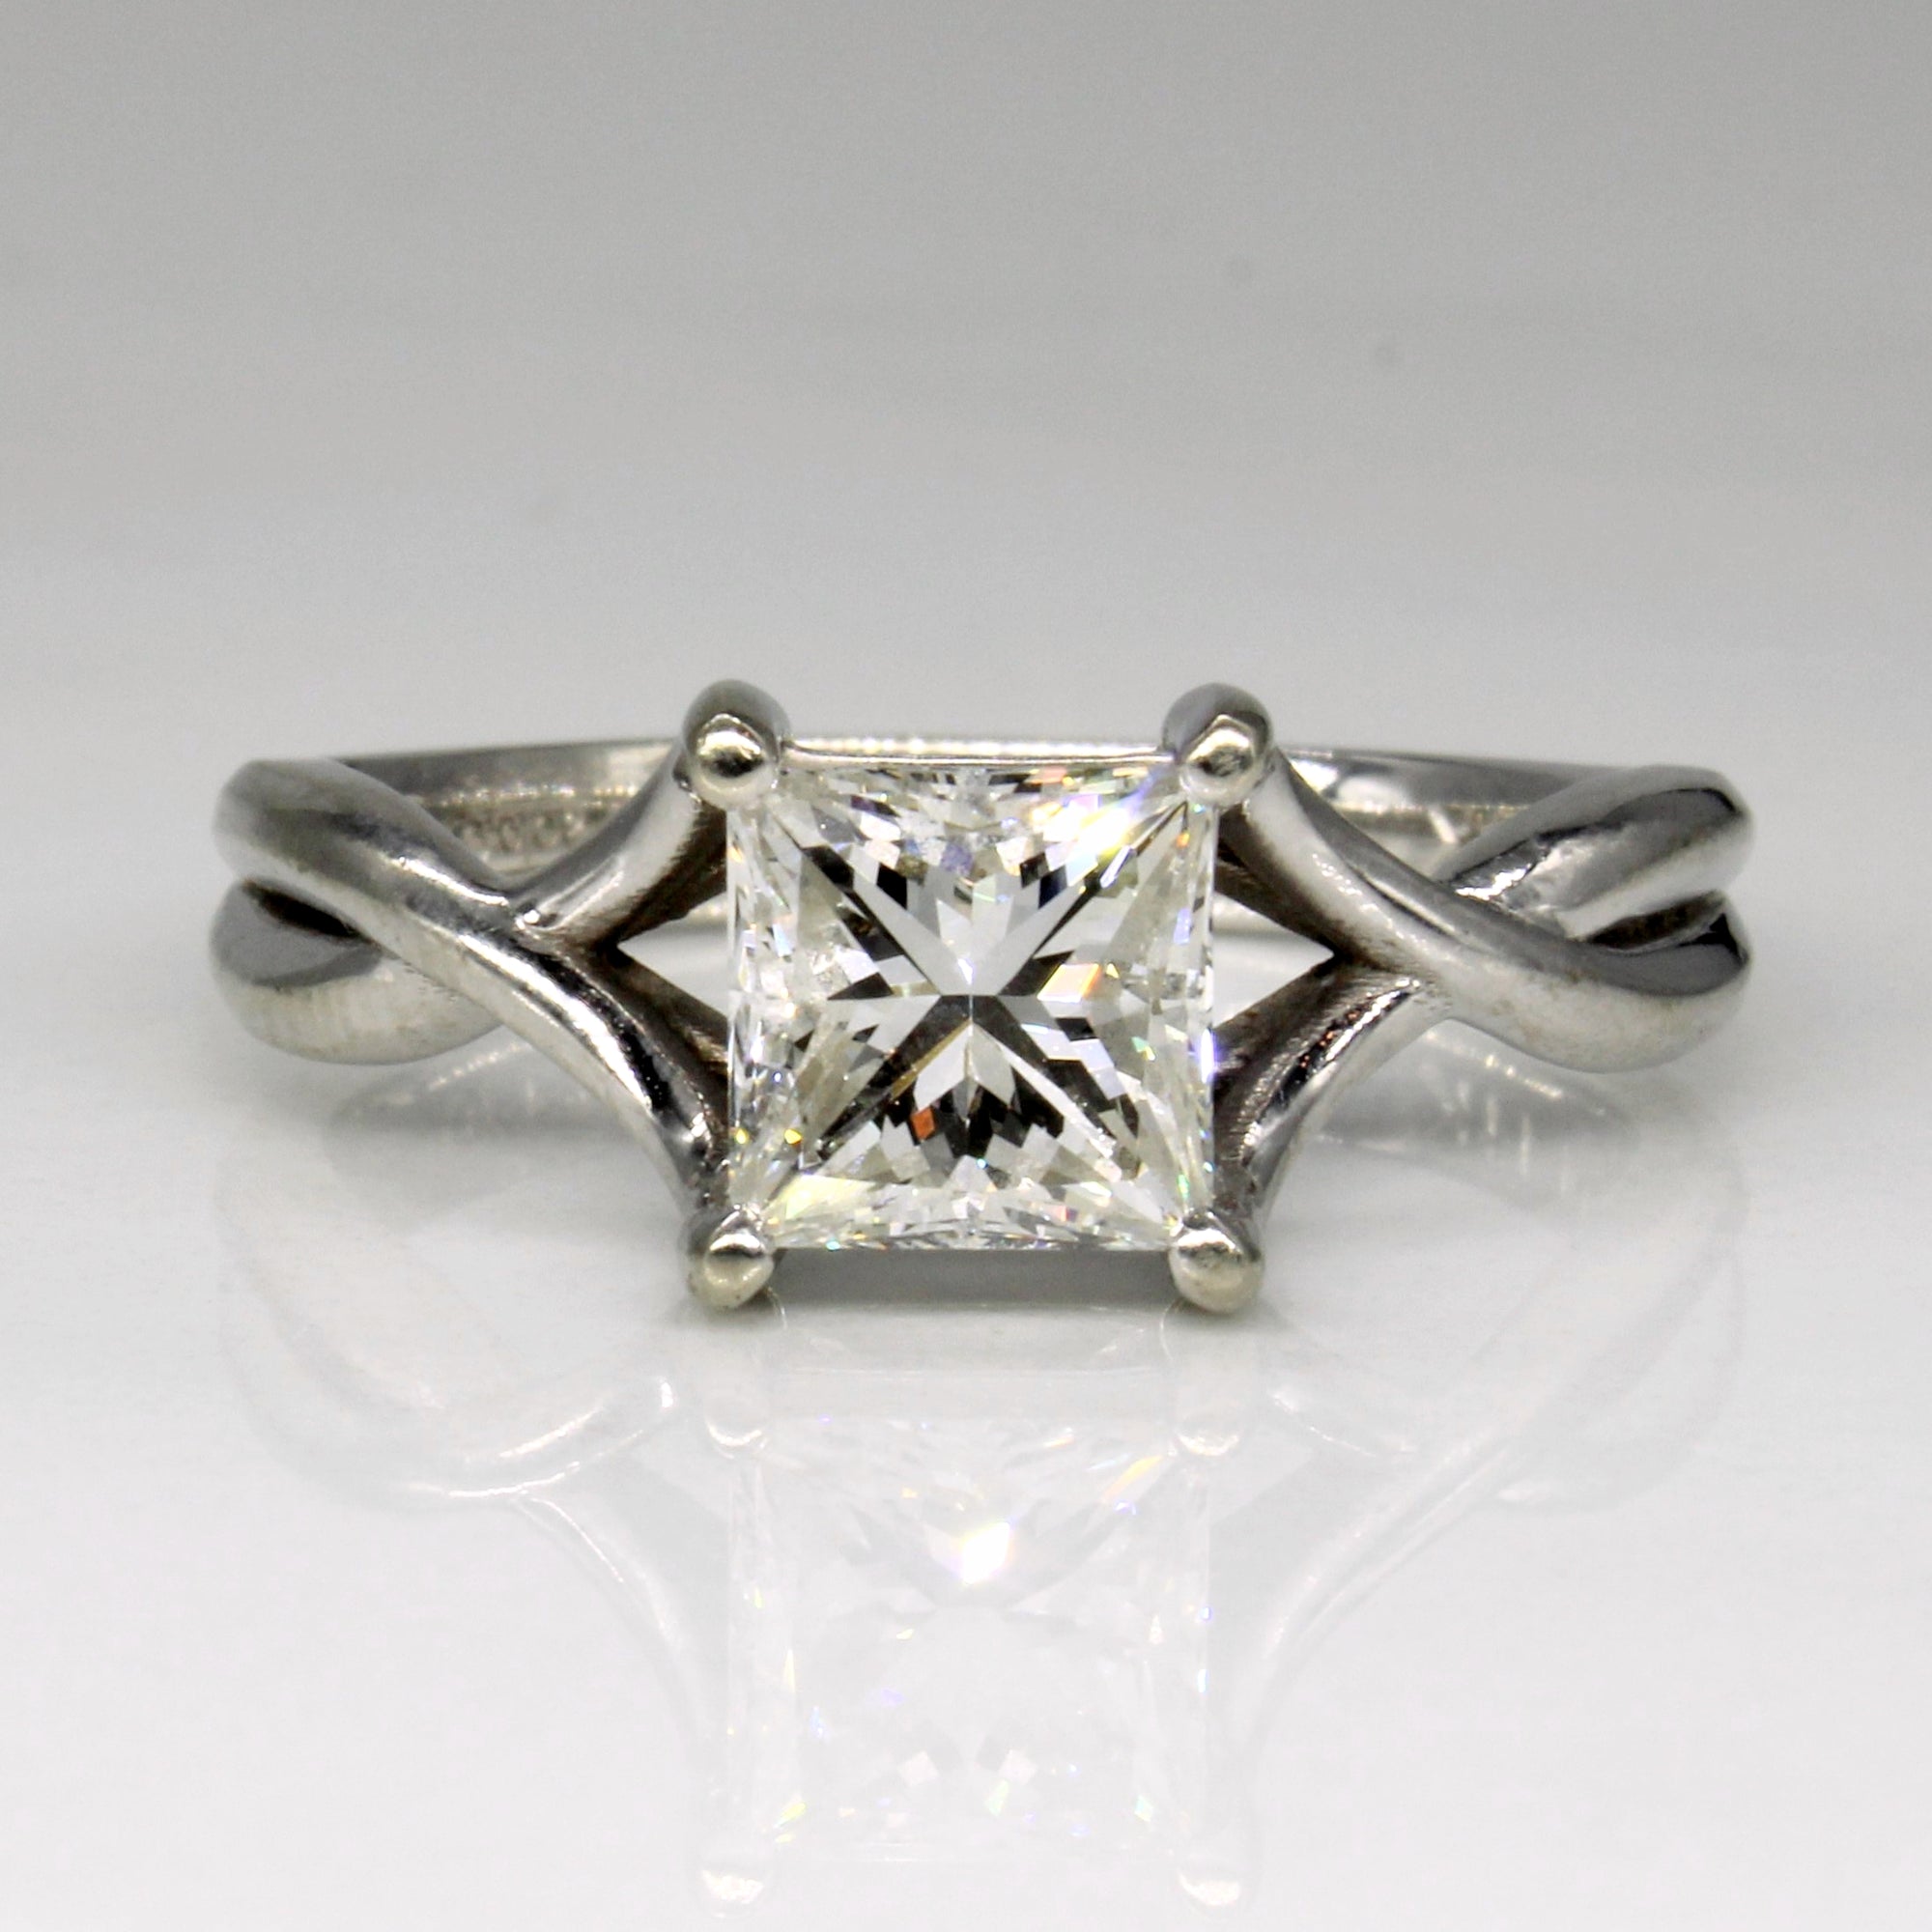 Paolo G' Diamond Engagement Ring | 1.59ct | SZ 8.75 |